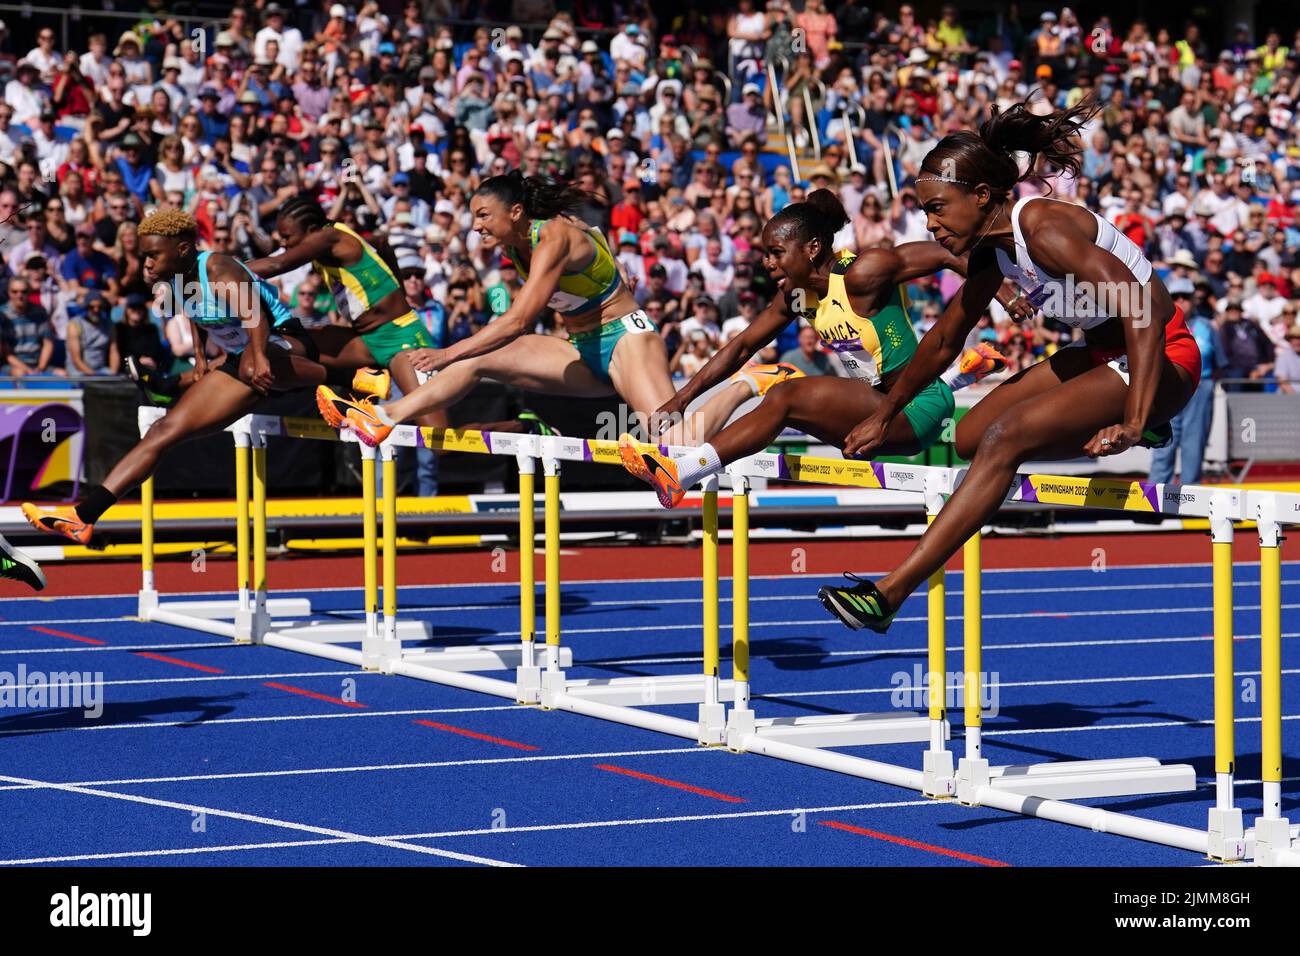 England's Cindy Sember (right) during Women's 100m Hurdles - Final at Alexander Stadium on day ten of the 2022 Commonwealth Games in Birmingham. Picture date: Sunday August 7, 2022. Stock Photo